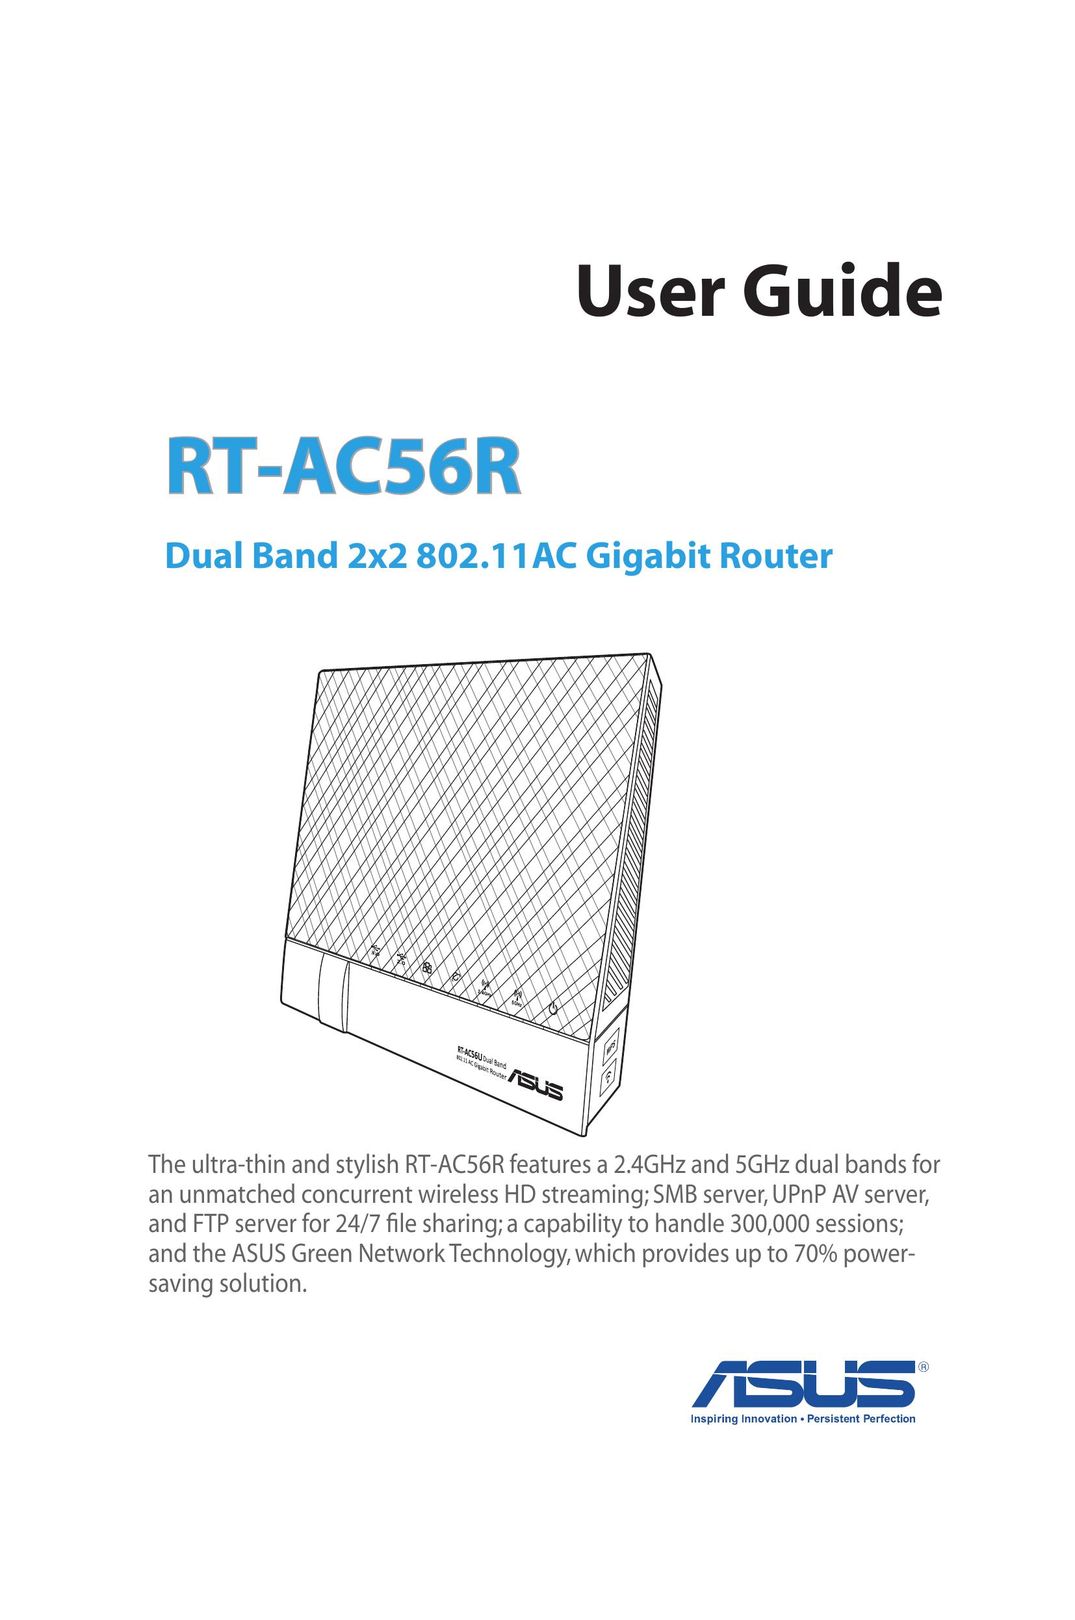 Asus RT-AC56R Network Router User Manual